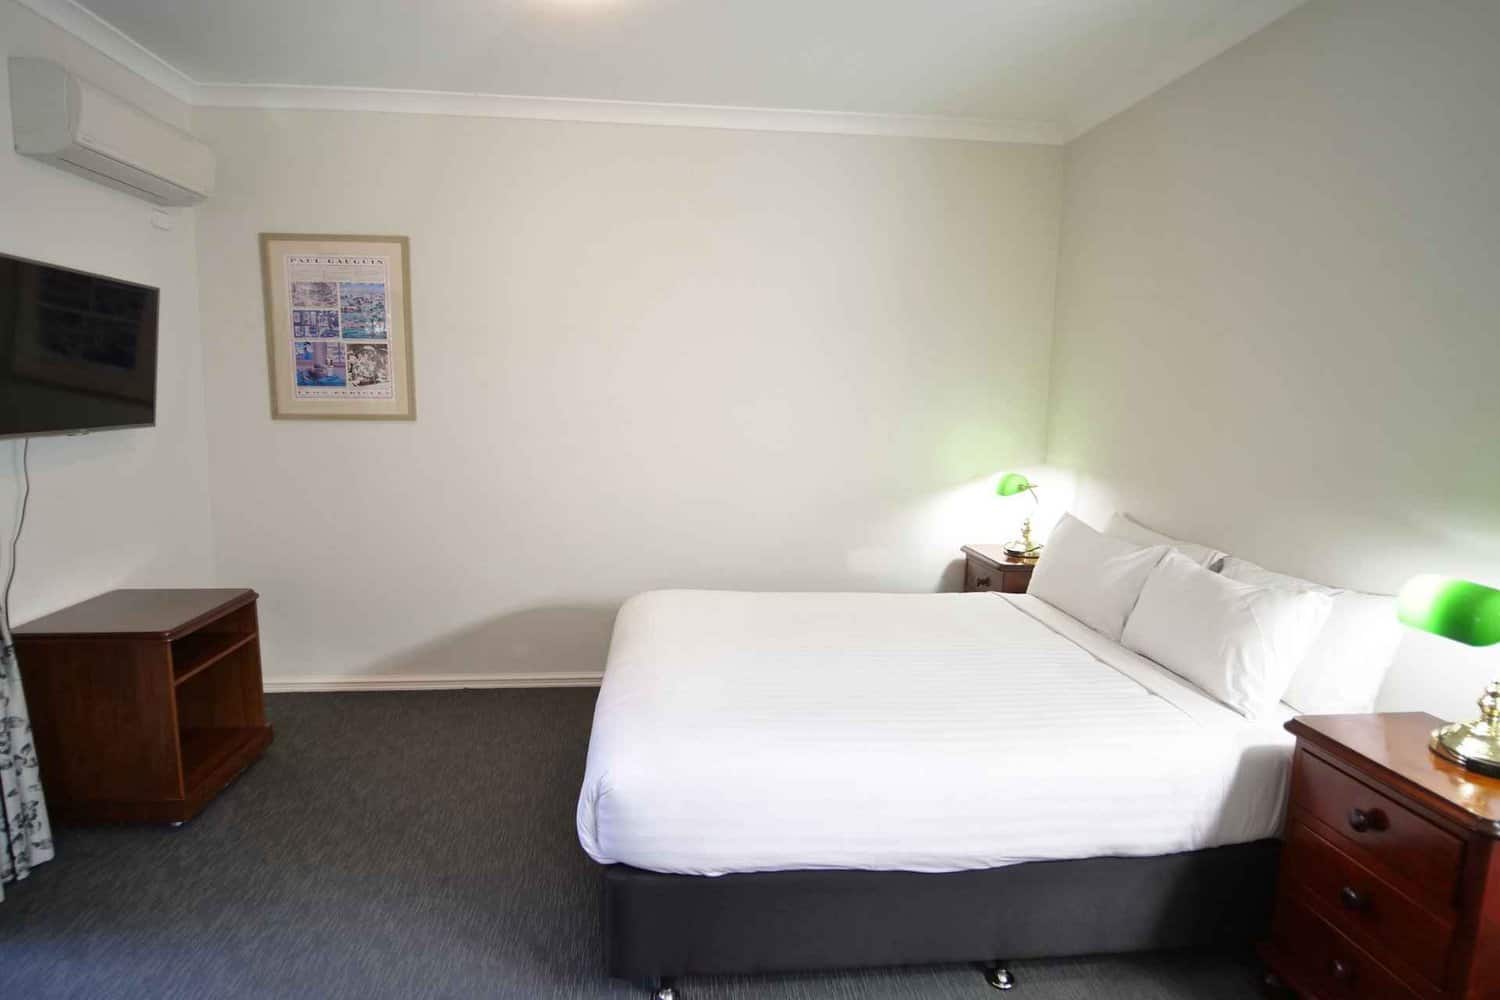 A cozy 2.5-star hotel room with a crisp white bed, bedside lamps, TV, and air conditioning, offering comfort and functionality for budget-conscious travelers.